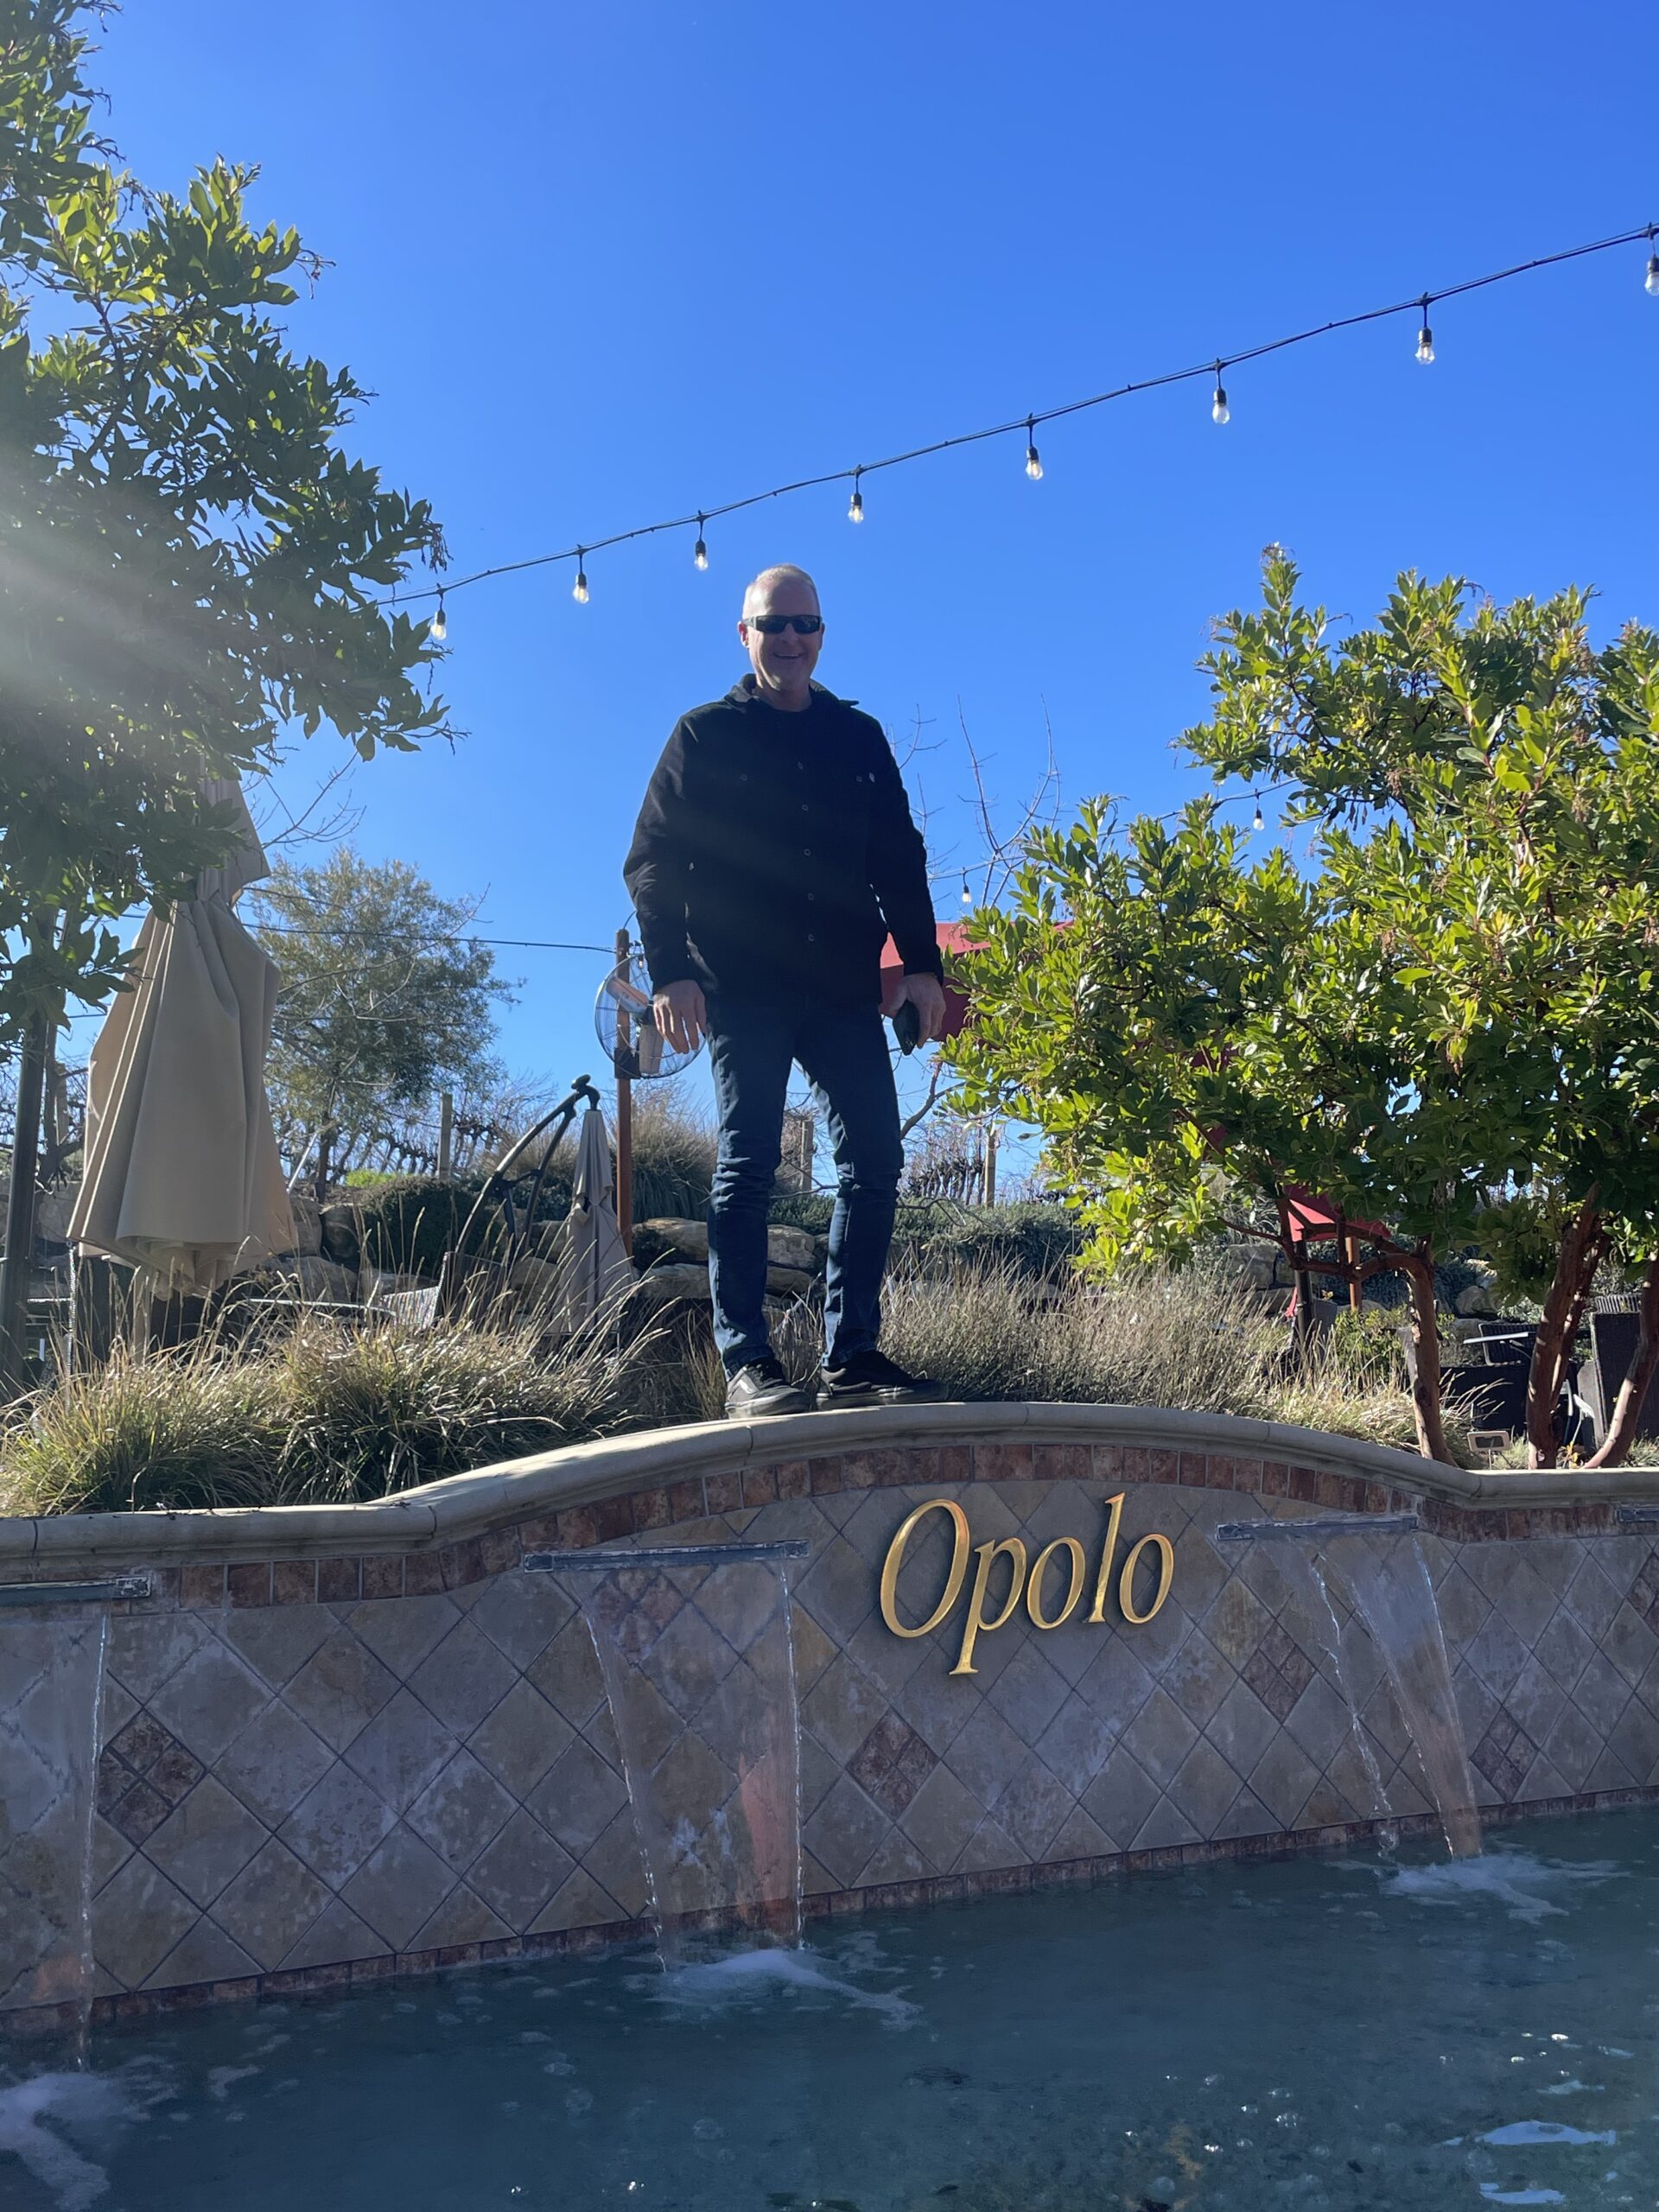 Man standing on a wall above the Opolo logo